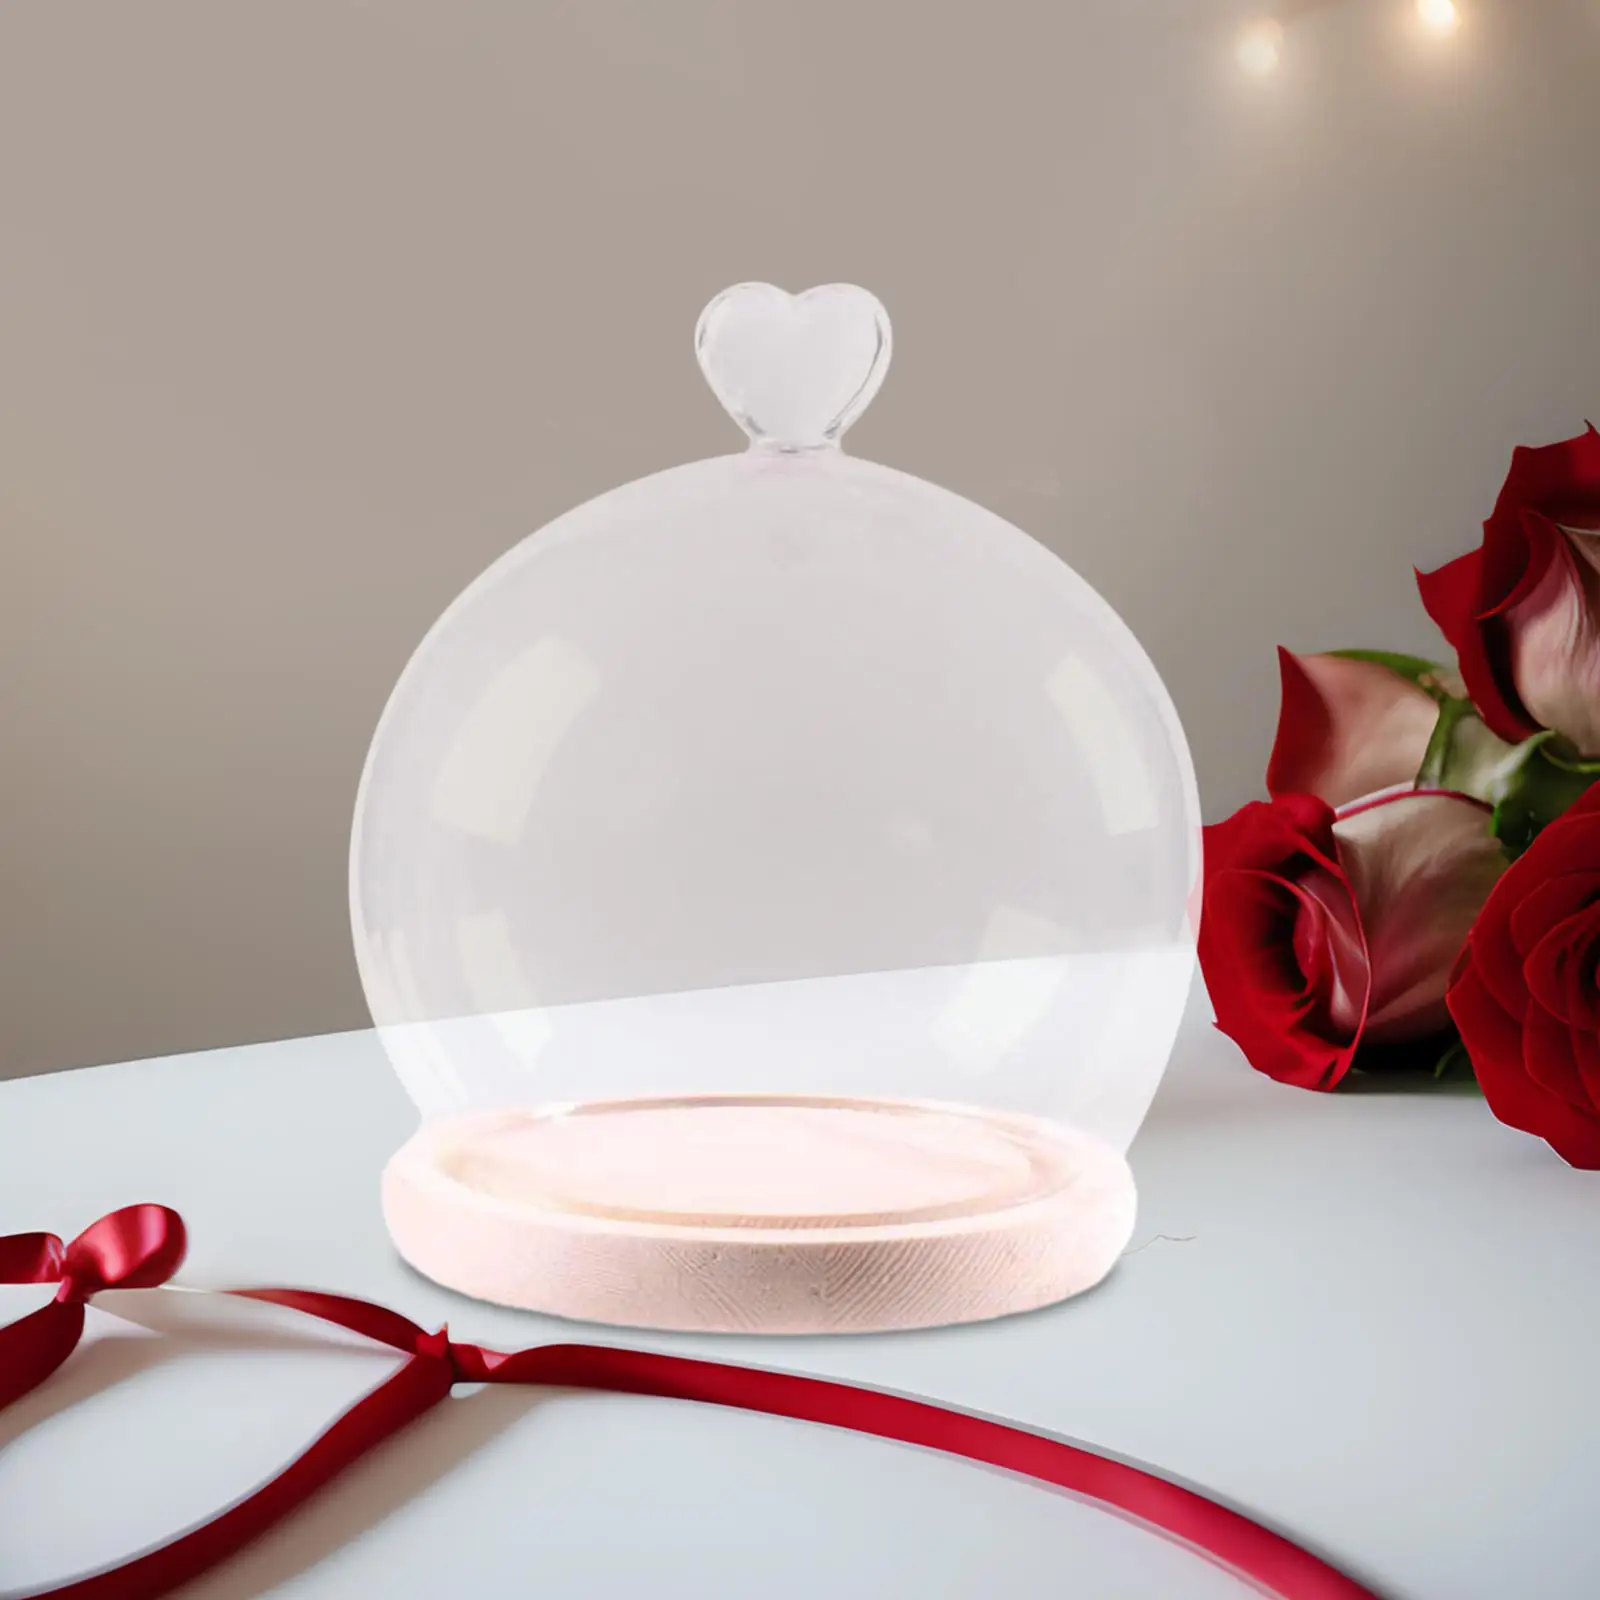 Display Dome with Wooden Base DIY Valentines Day Decor Collectibles Anniversary Gifts Home Decoration Jar Dustproof Display Case